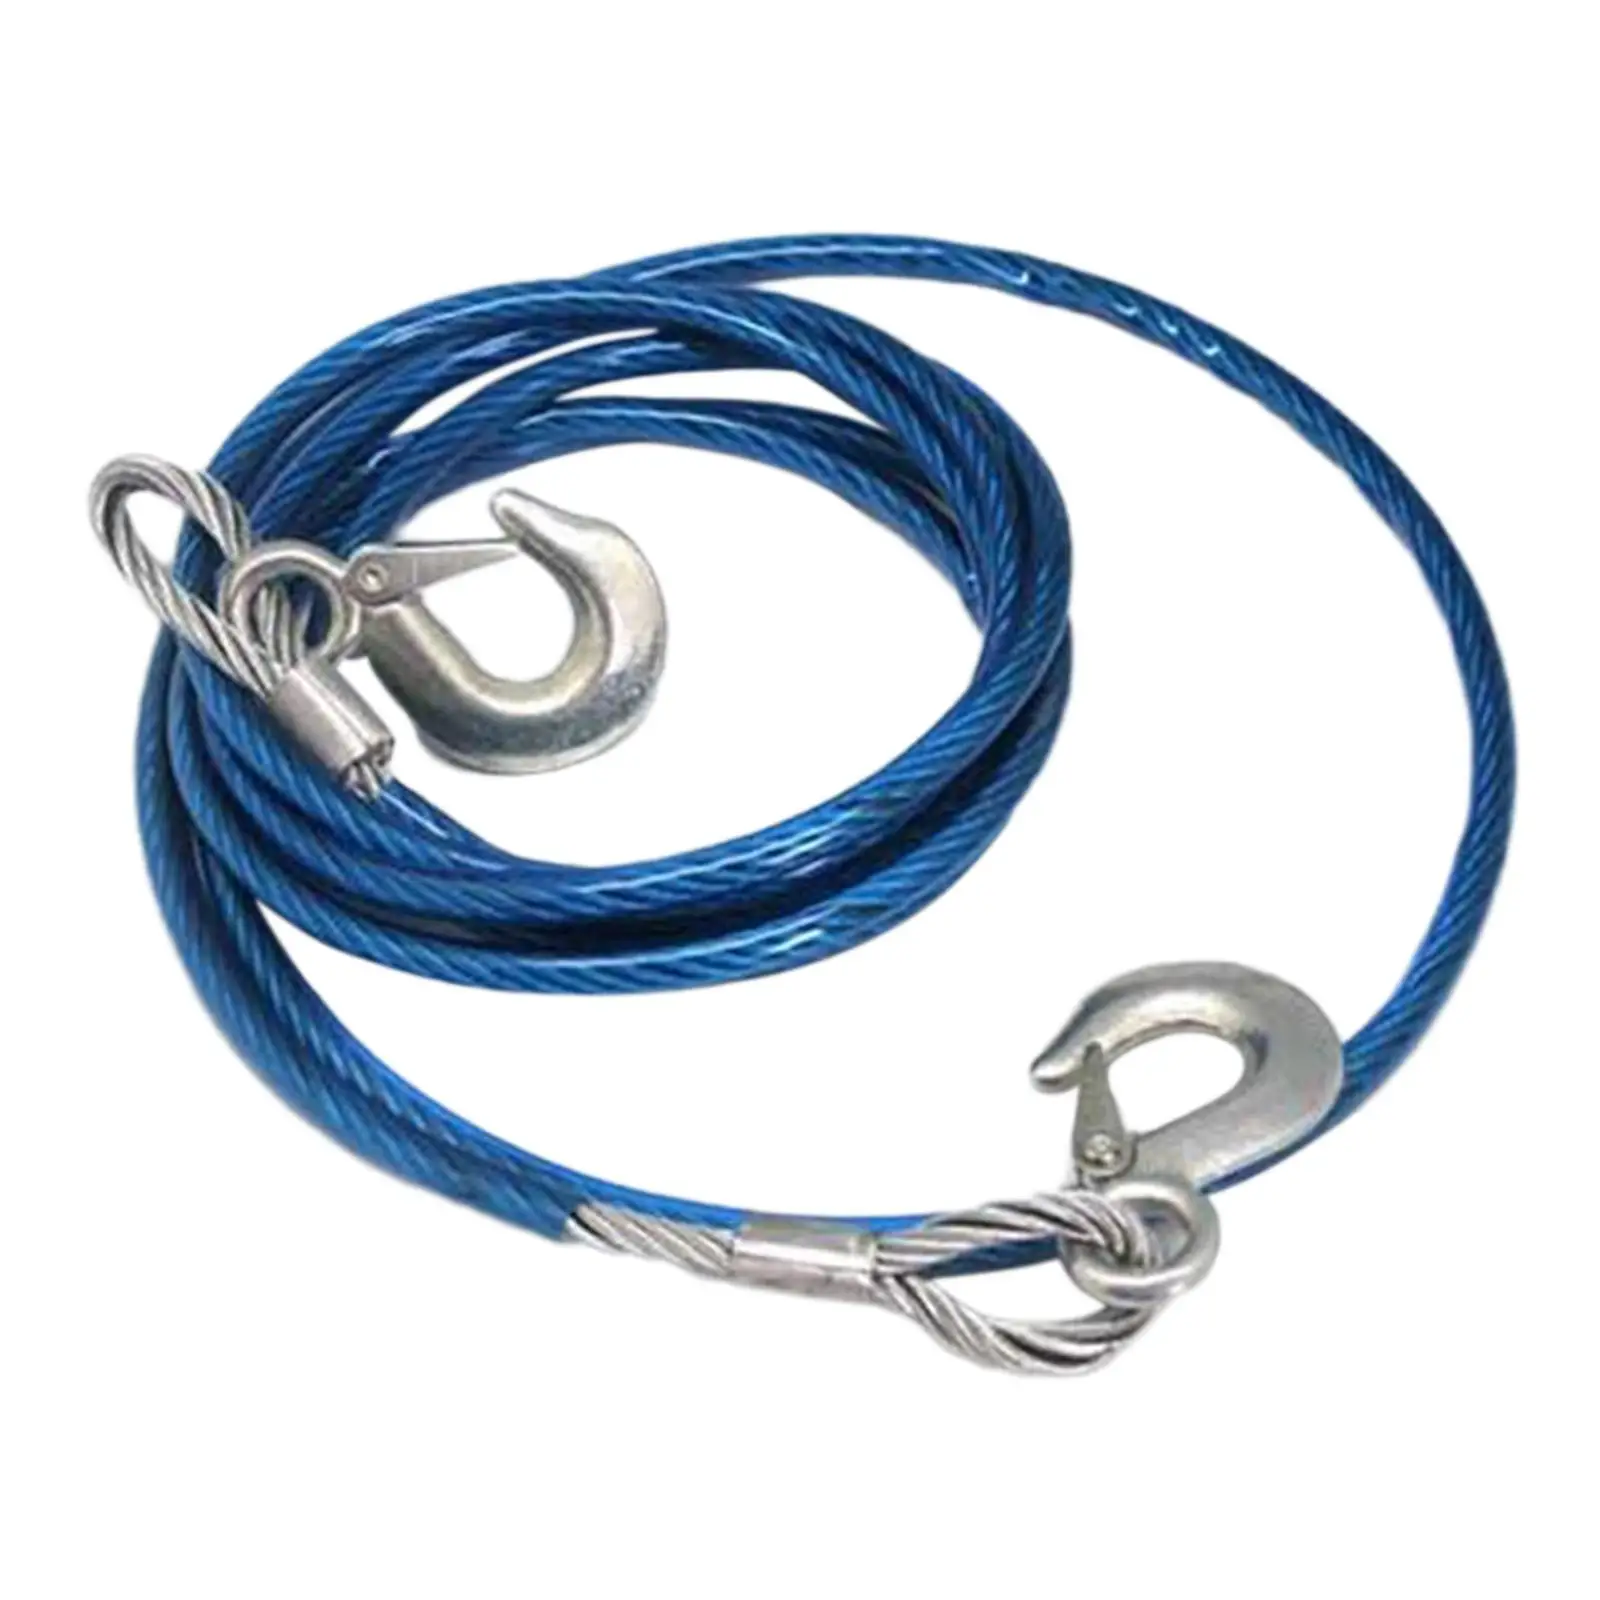 Trailer Rope Anti Slip Tow Rope for Vehicle Recovery Hauling Towing